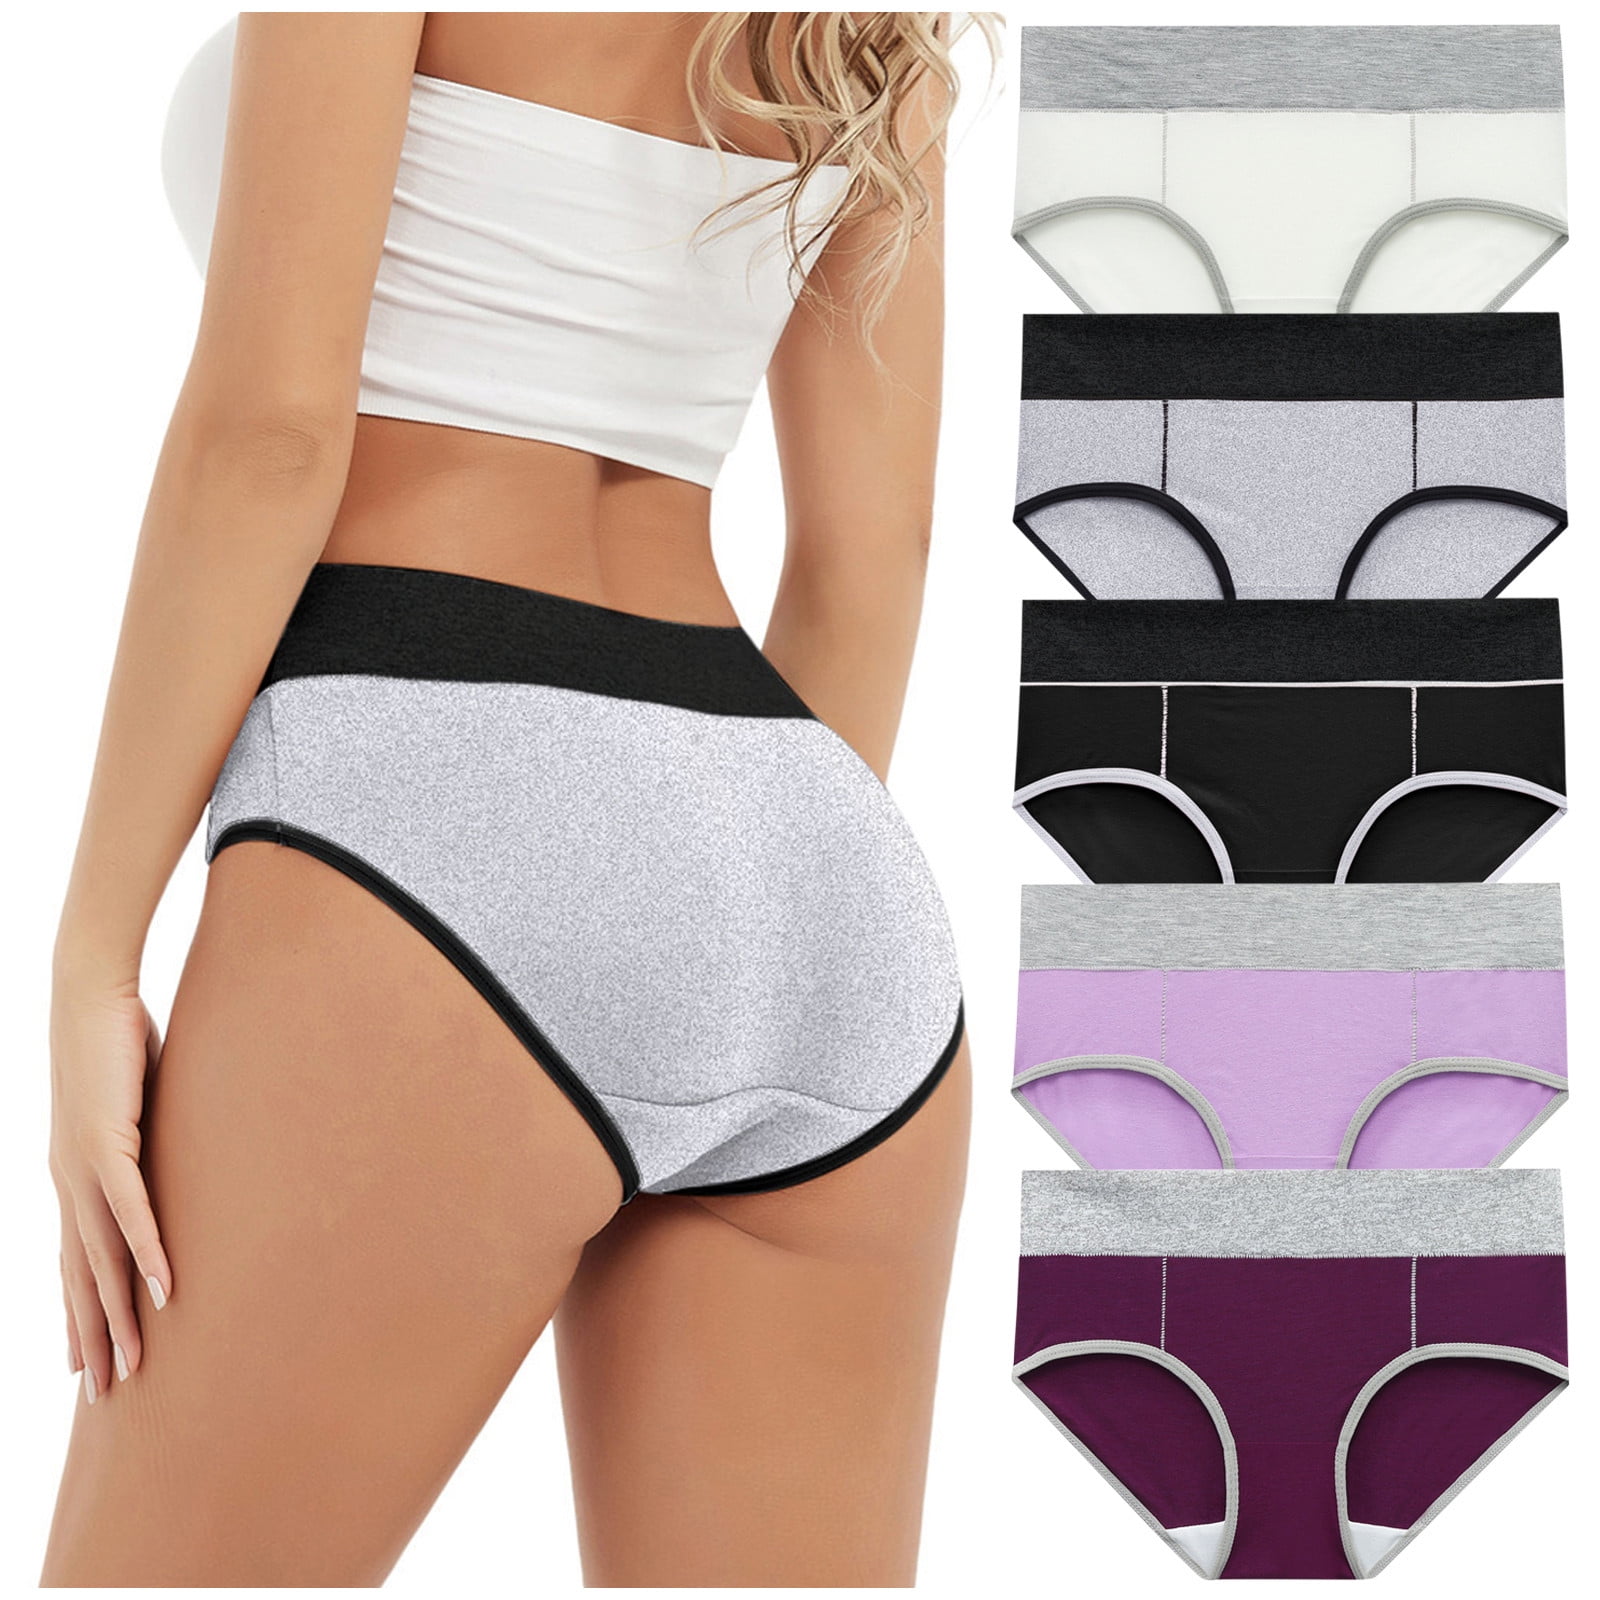 Eashery Sext Panty for Women Women's High Waist Cotton Underwear Stretch  Briefs Soft Comfy Ladies Panties Multicolor X-Large 